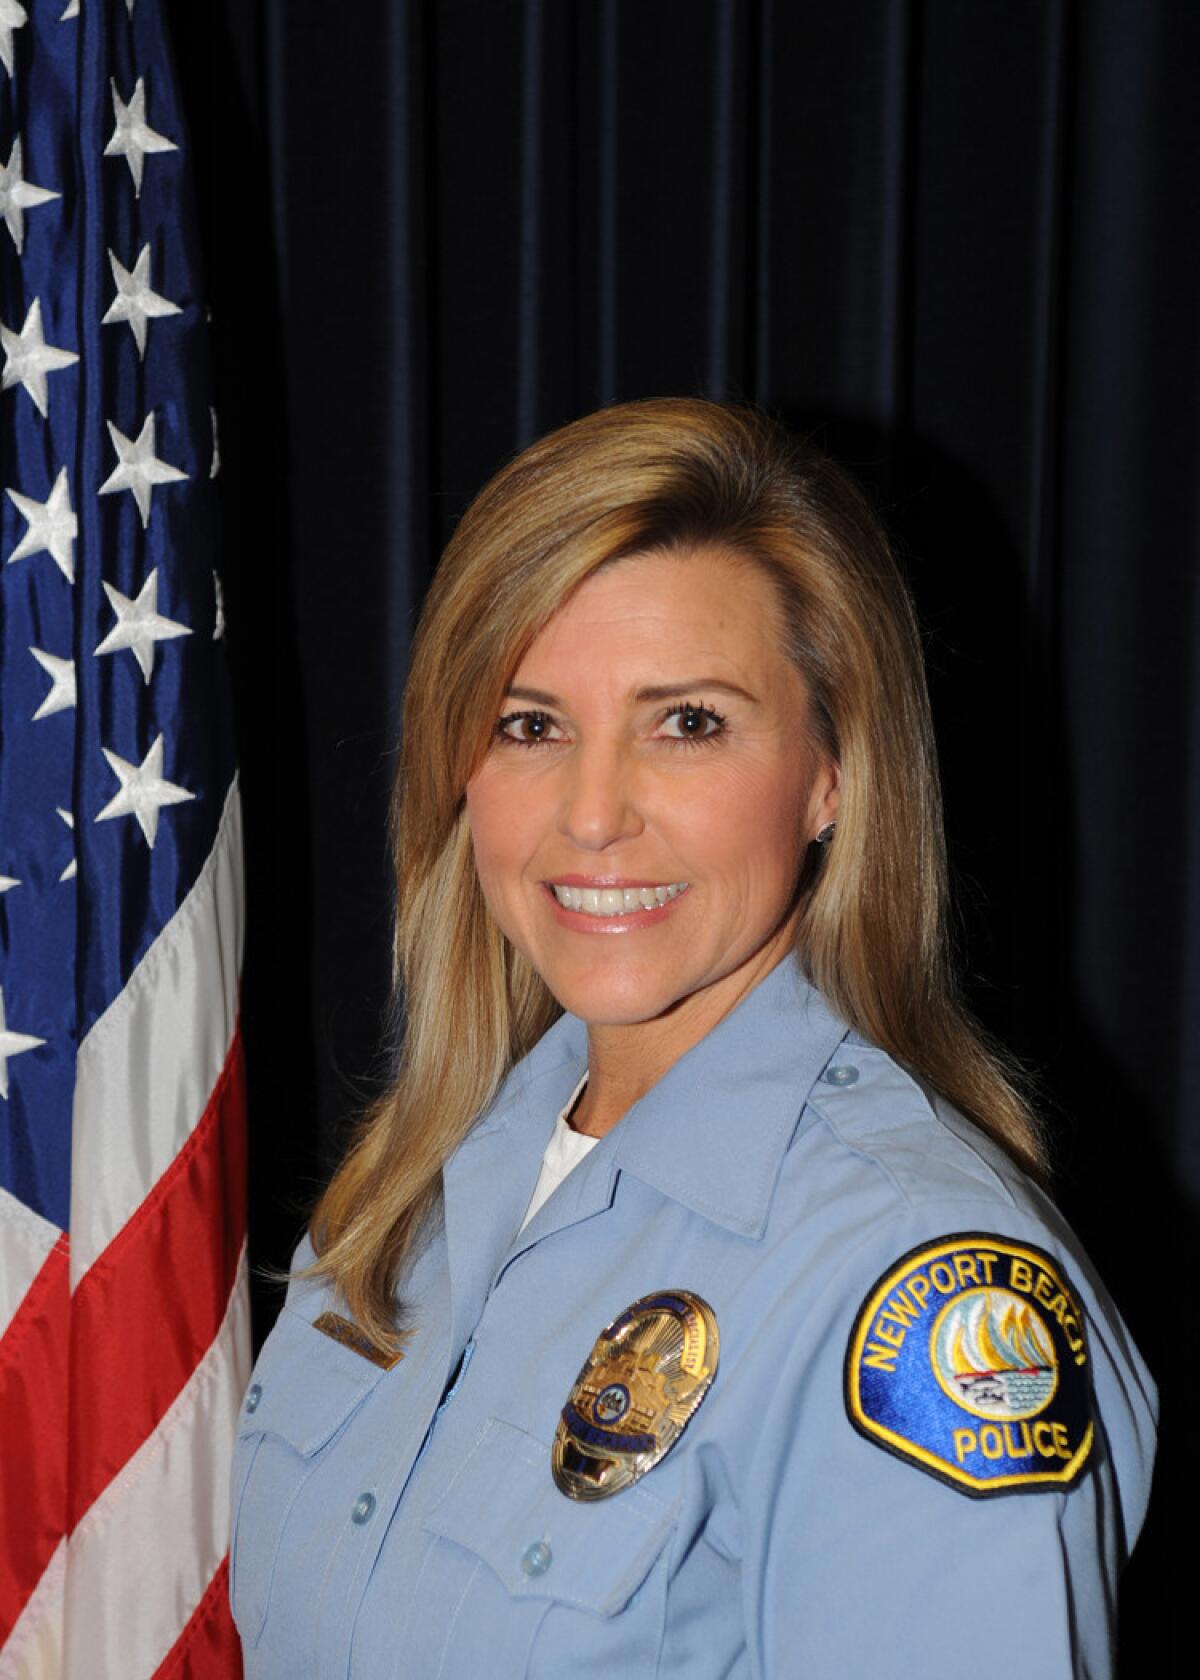 Kathy Lowe retired from the Newport Beach Police Department after 30 years.